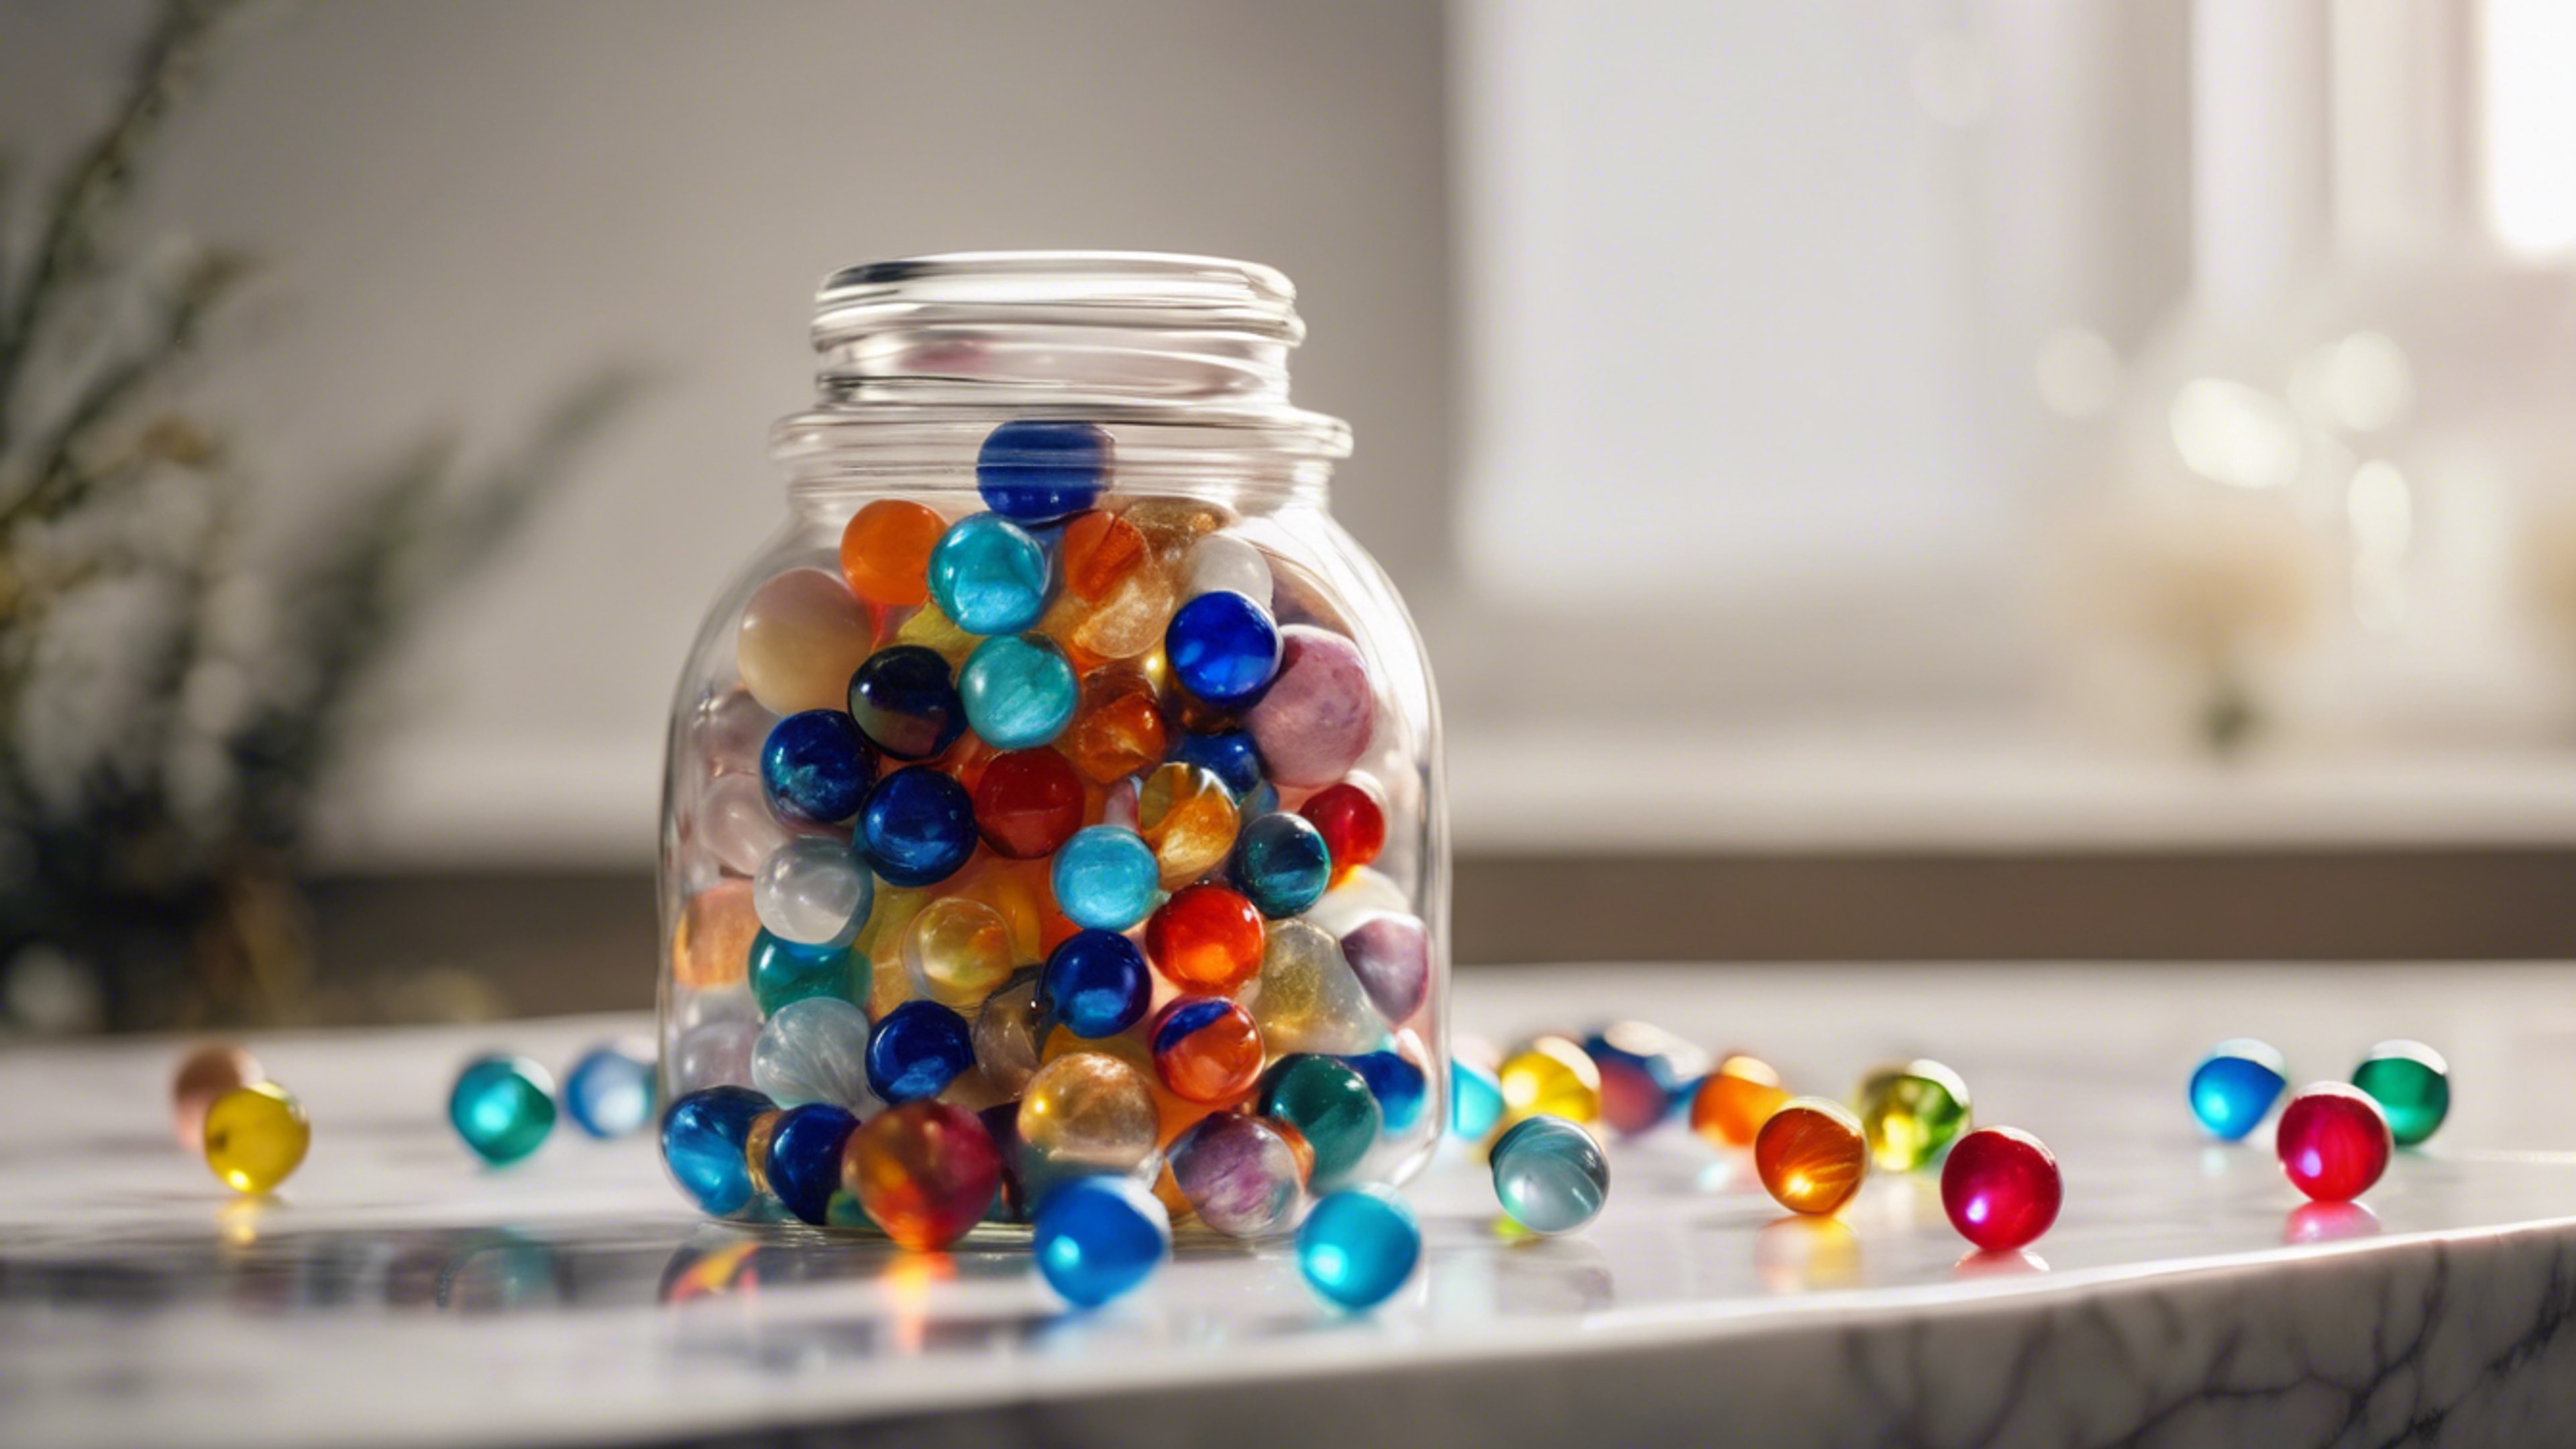 A glass jar full of colorful marbles with glinting lights around them, placed on a white marble surface.壁紙[9438bf9259b84d3ca042]